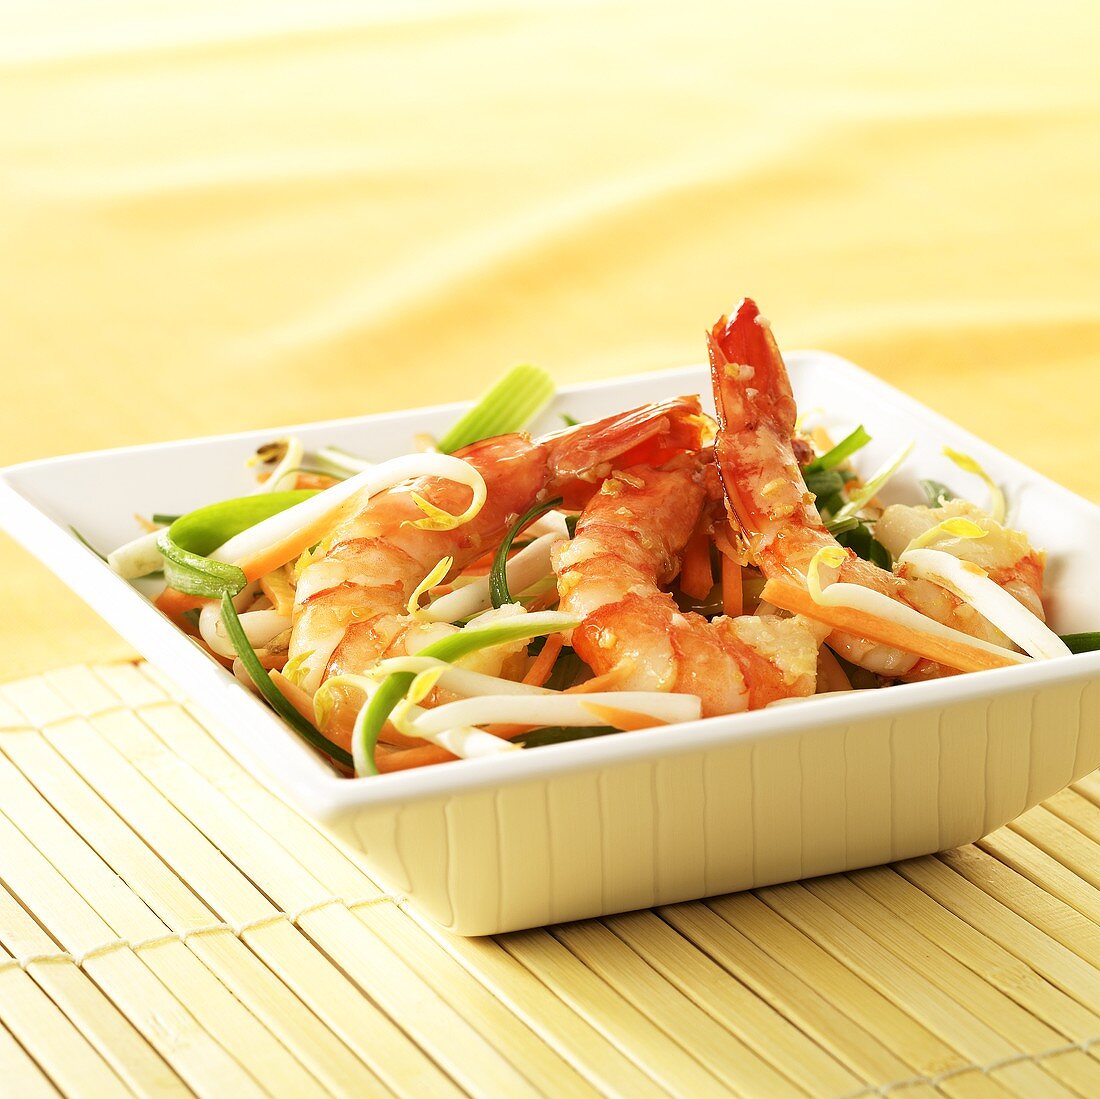 Three jumbo prawns with ginger and Asian vegetables